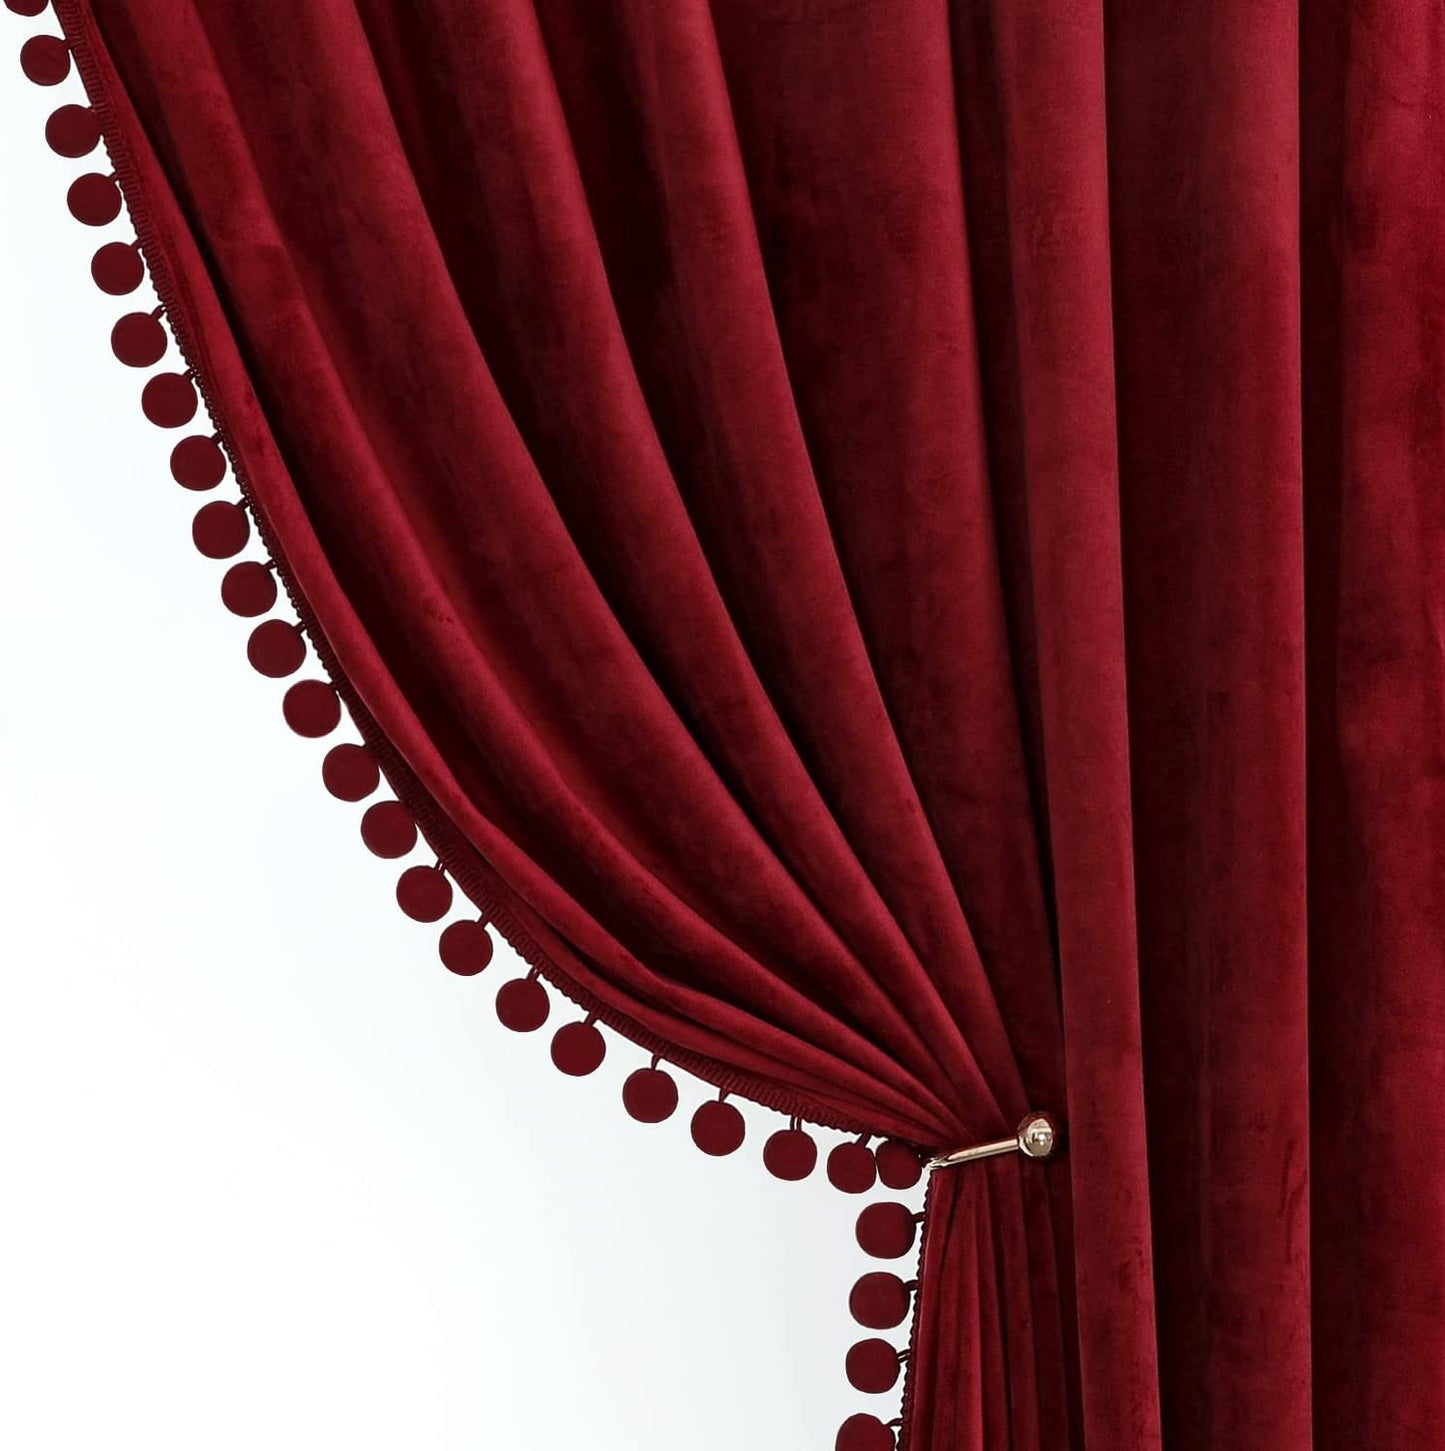 Benedeco Green Velvet Curtains for Bedroom Window, Super Soft Luxury Drapes, Room Darkening Thermal Insulated Rod Pocket Curtain for Living Room, W52 by L84 Inches, 2 Panels  Benedeco Burgundy-Pom W52 * L108 | 2 Panels 